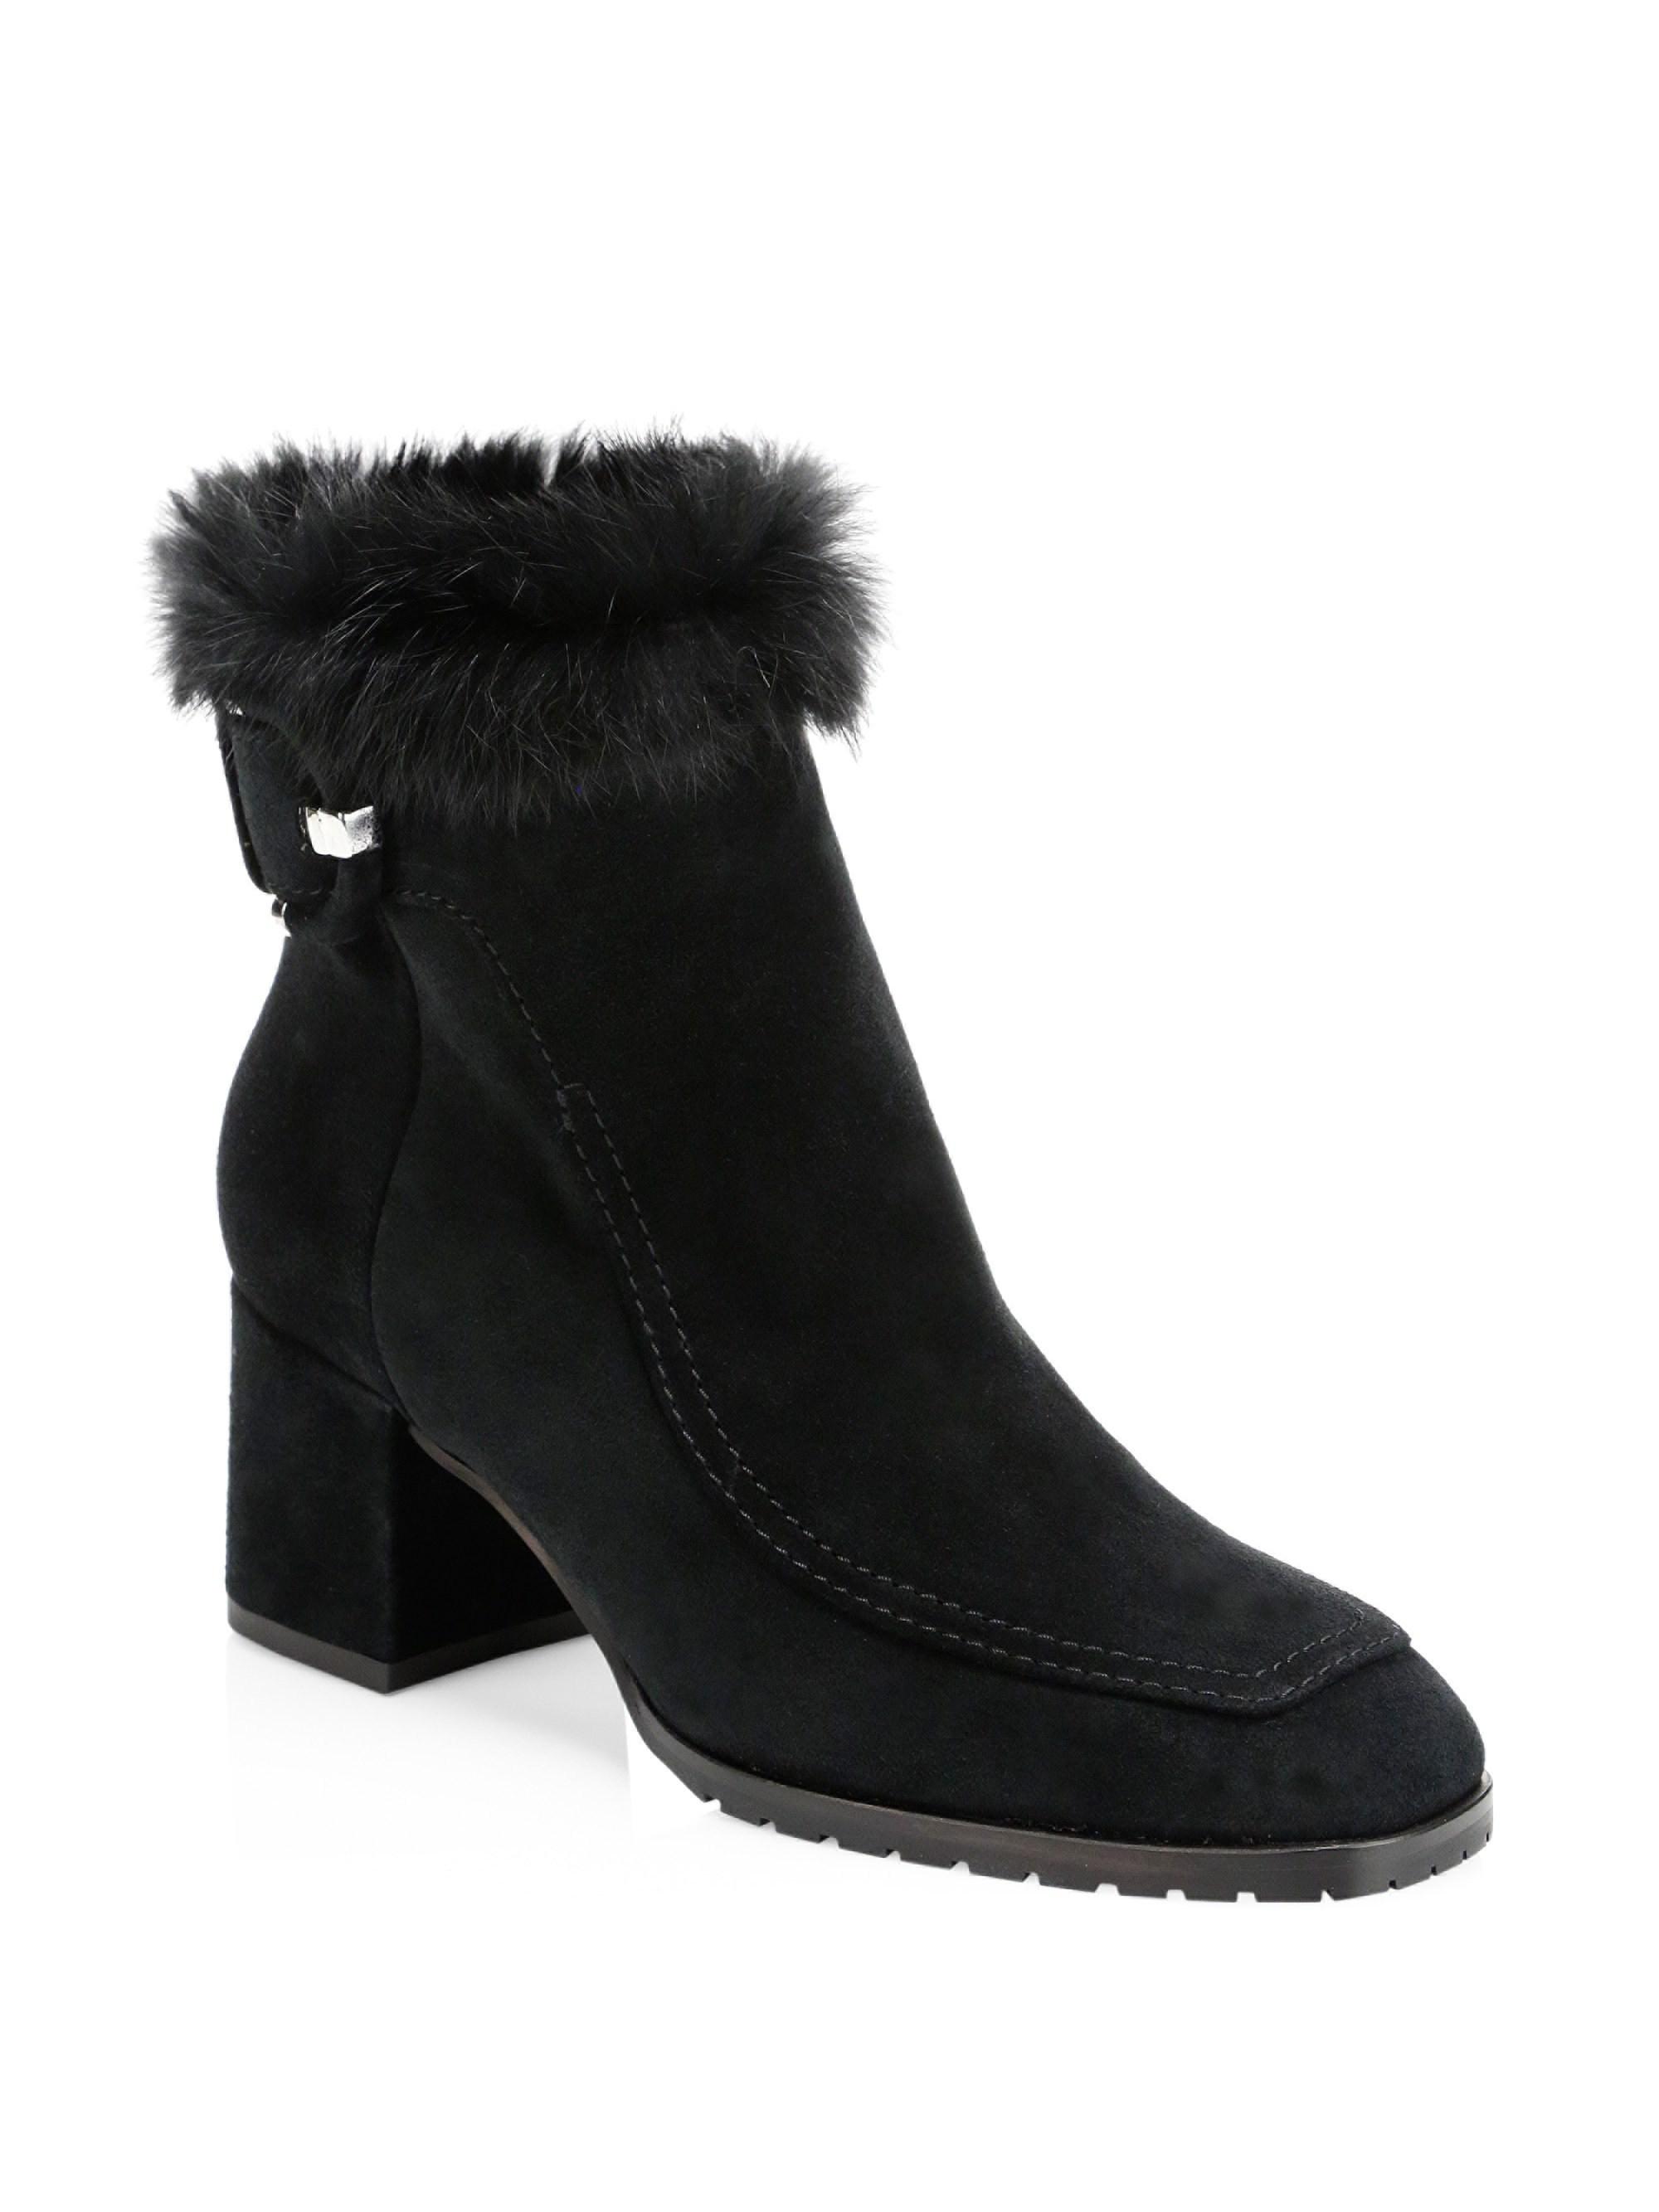 Lyst - Aquatalia Charlize Rabbit Fur-trim & Shearling-lined Suede Ankle ...